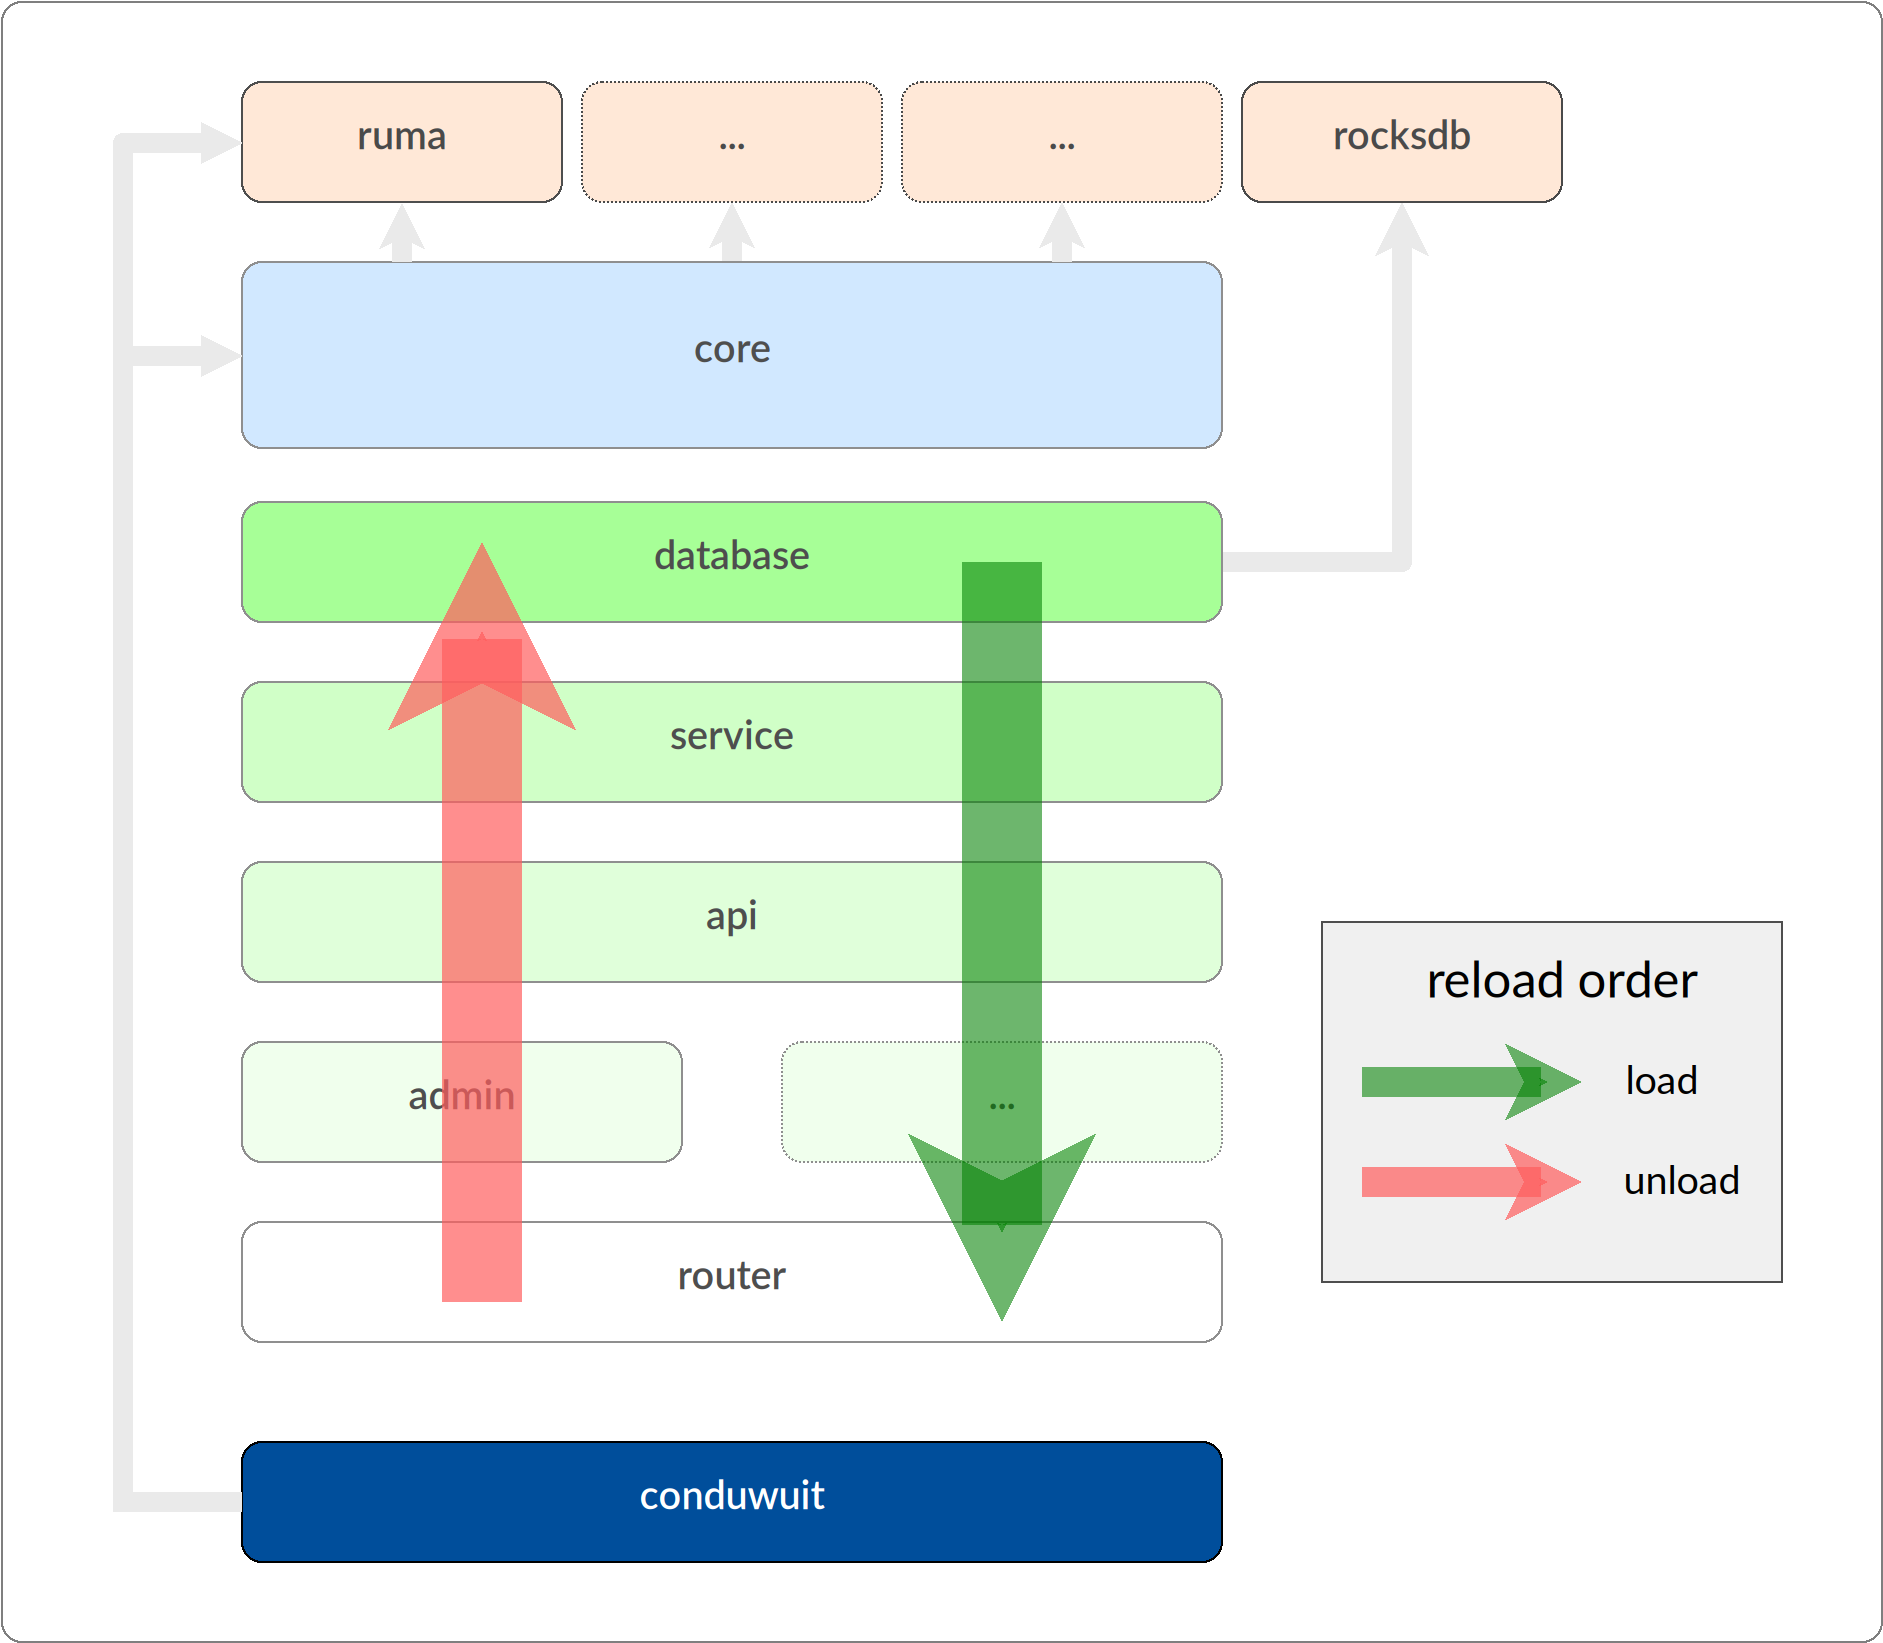 conduwuit's reload and load order diagram - created by Jason Volk